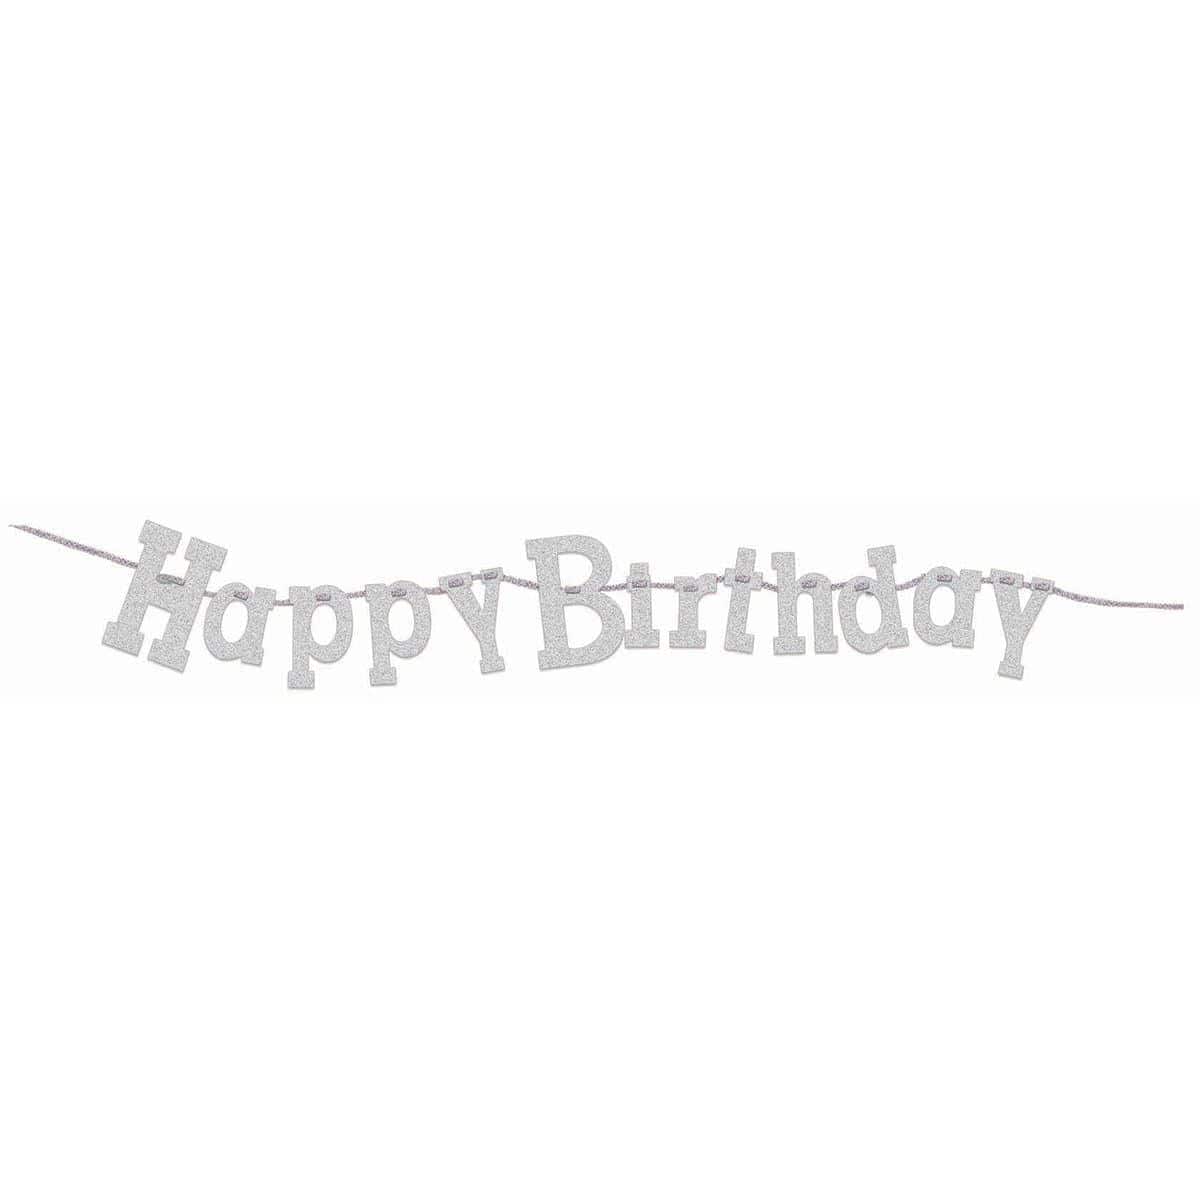 Buy General Birthday Diamond Banners 7 In. - Happy Birthday - Silver sold at Party Expert